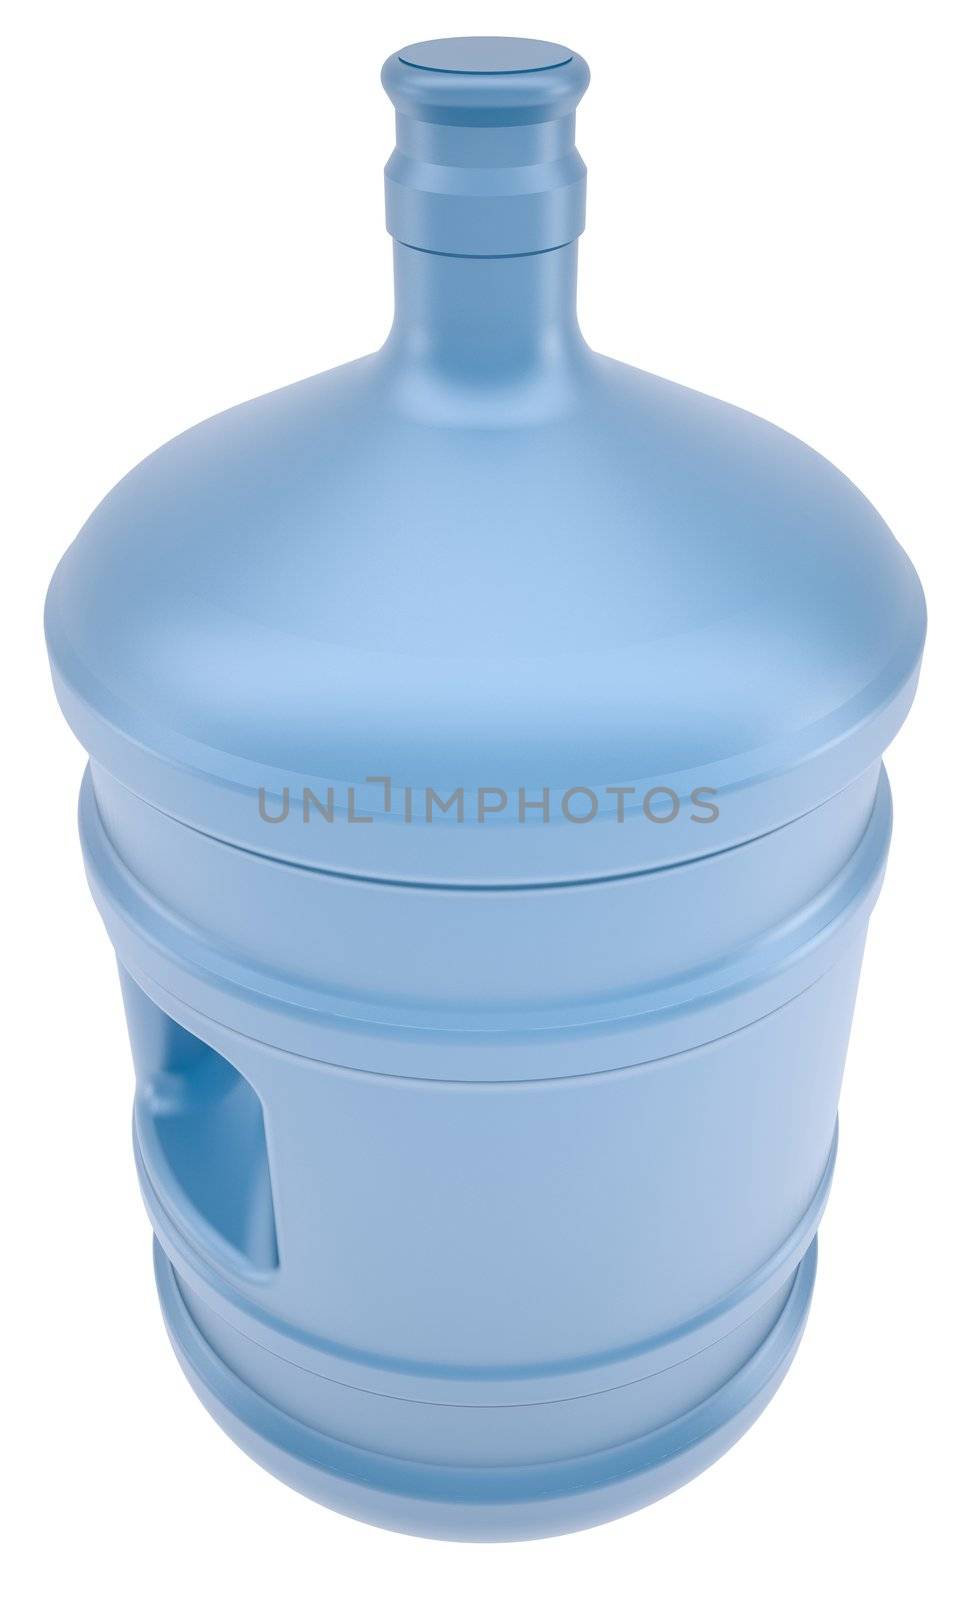 A large bottle of water. Isolated render on a white background